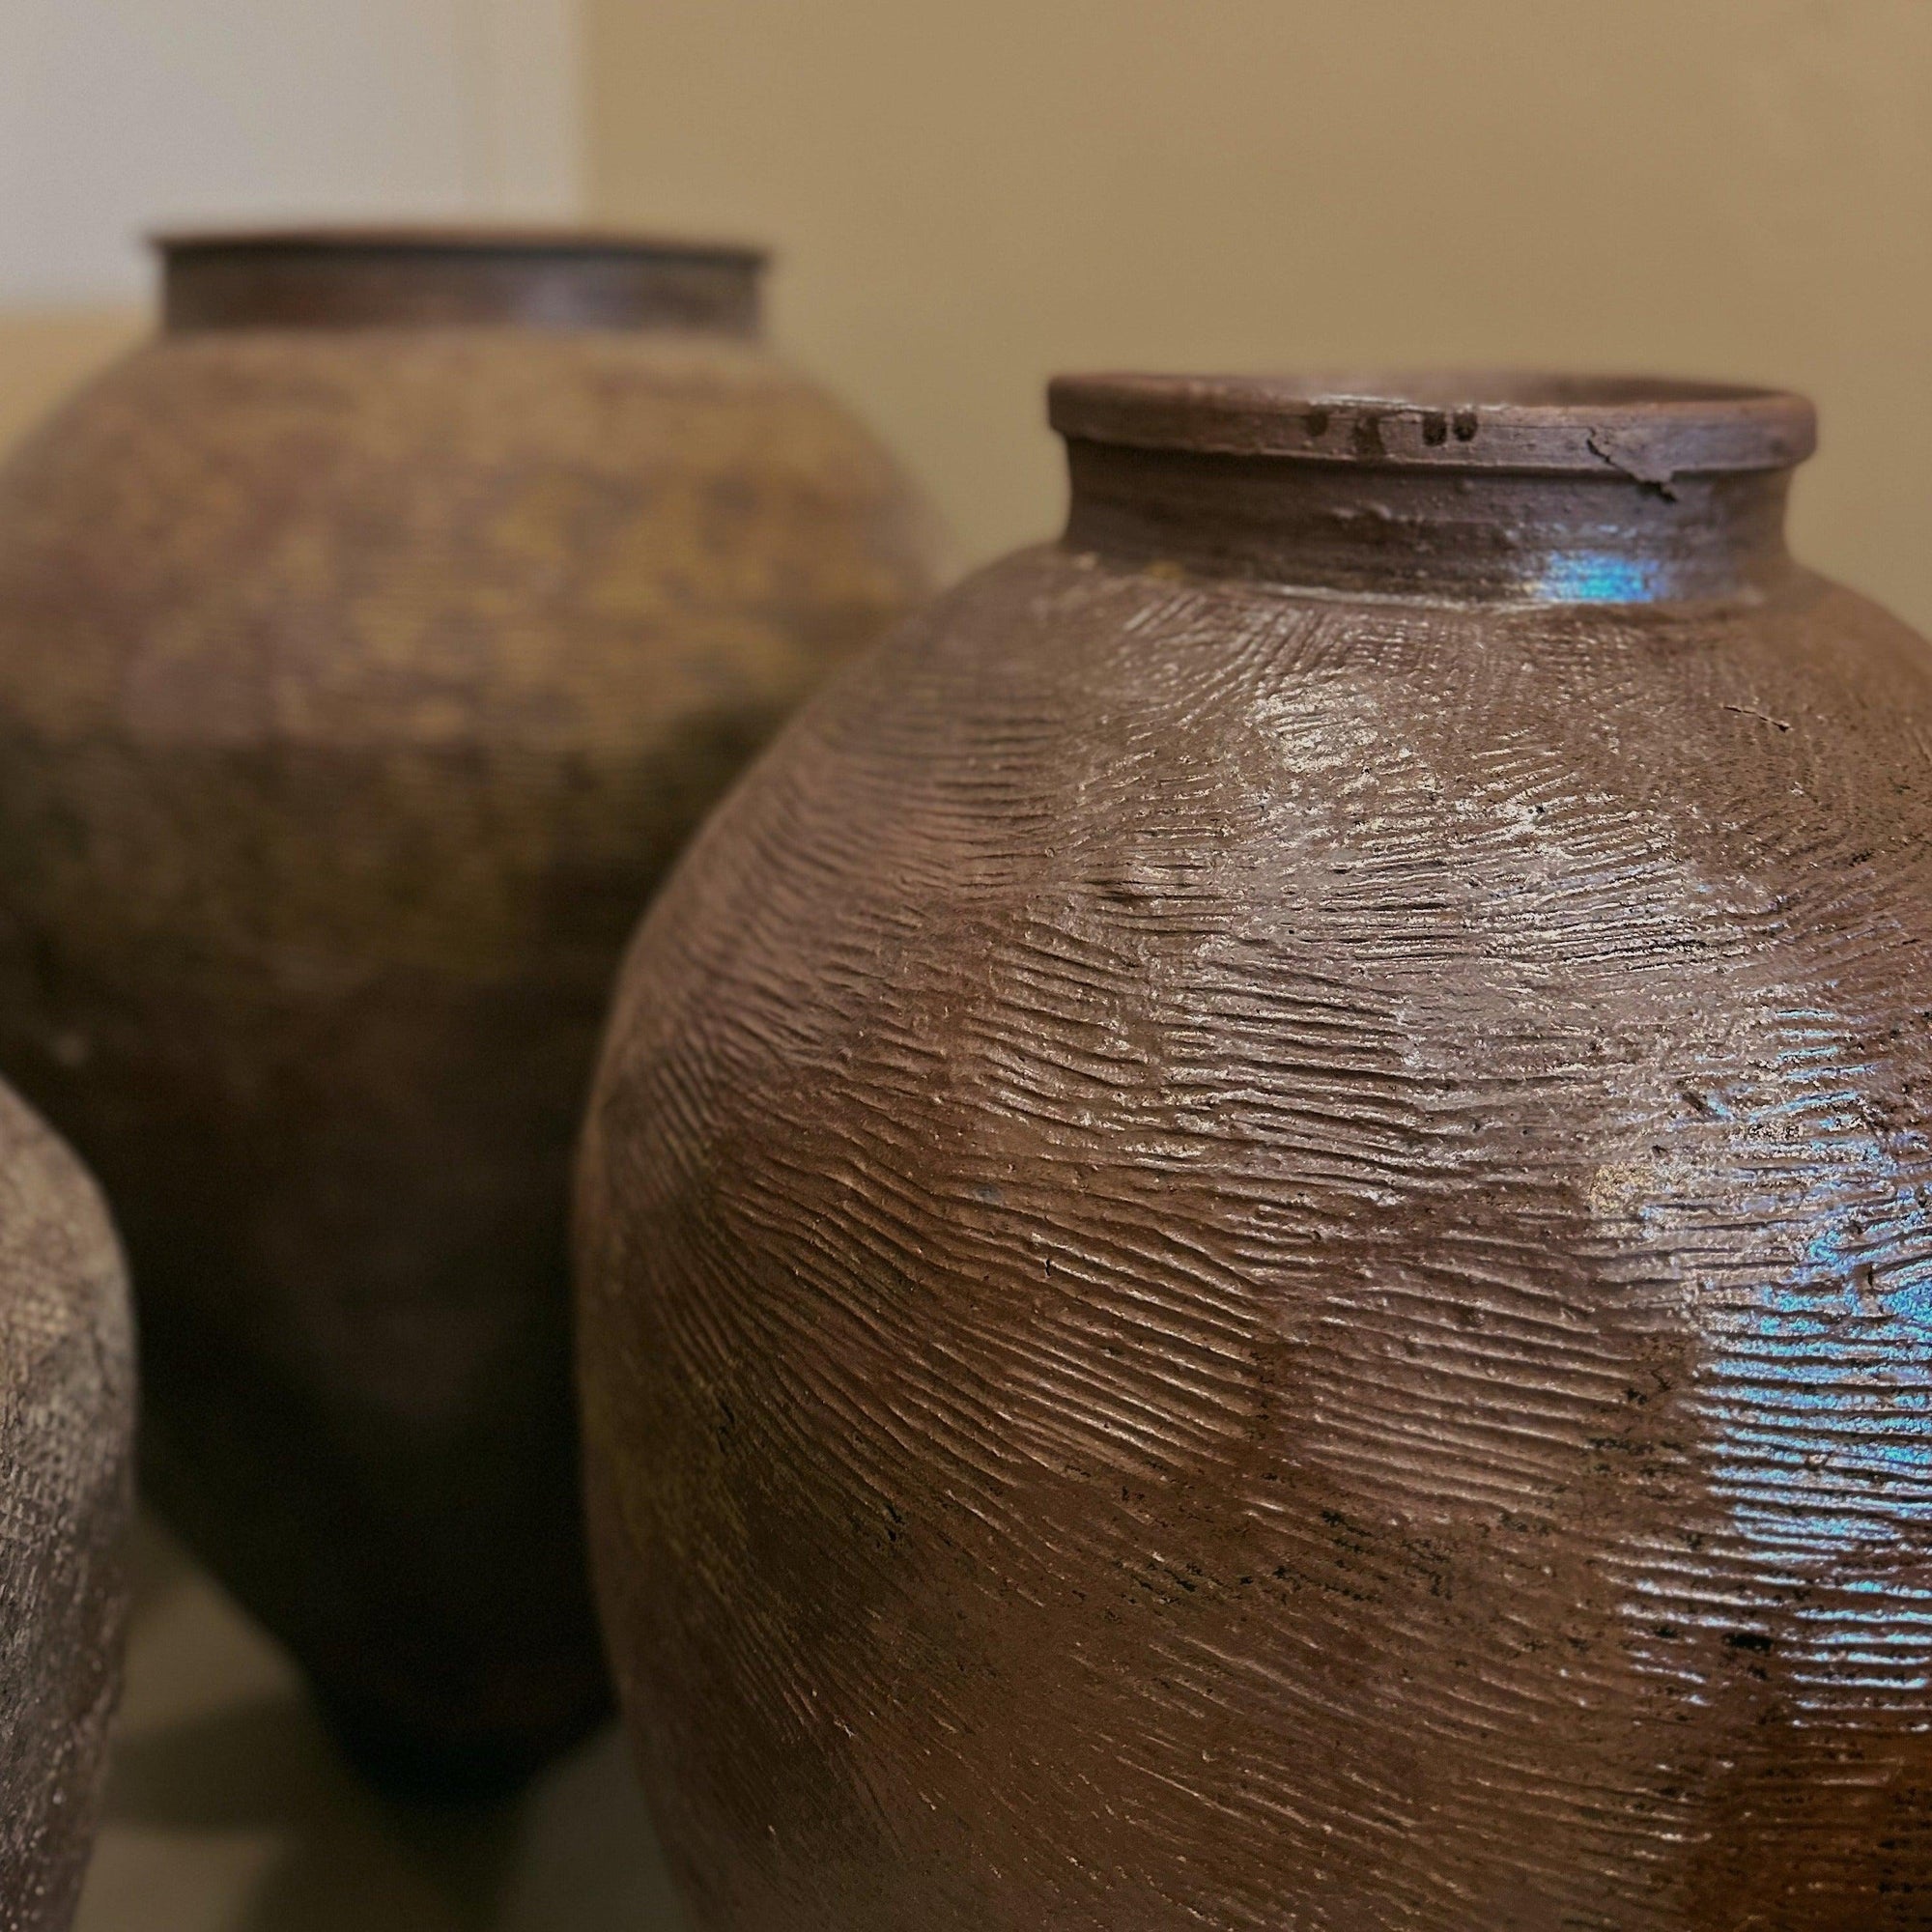 Large Water Vessels - Cultheir 